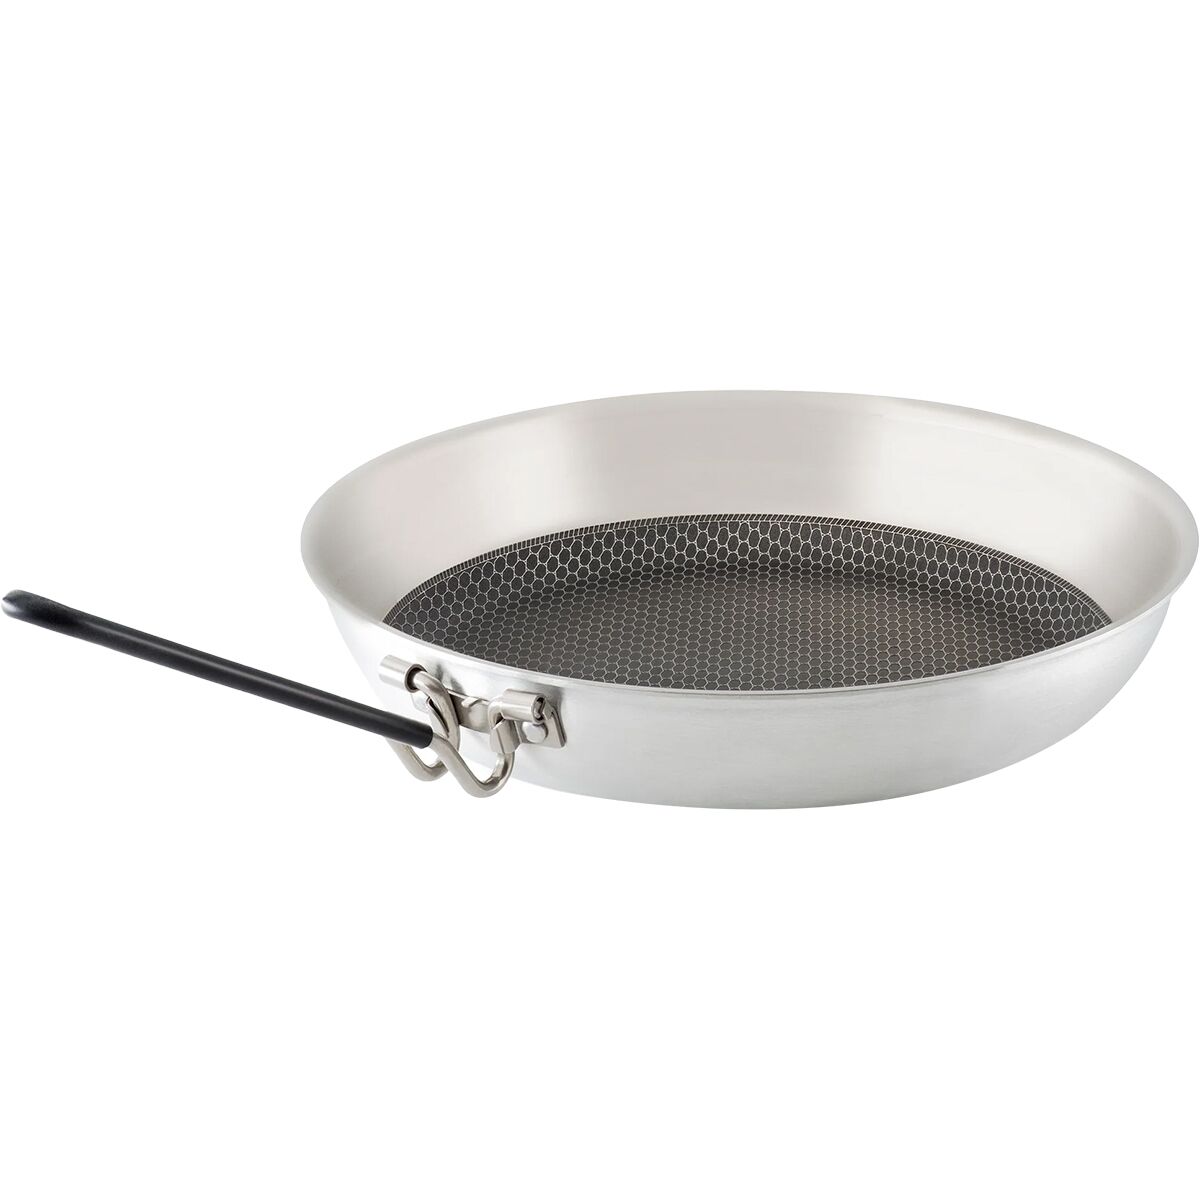 GSI Outdoors Steel Nonstick Frypan for Backpacking and Camping